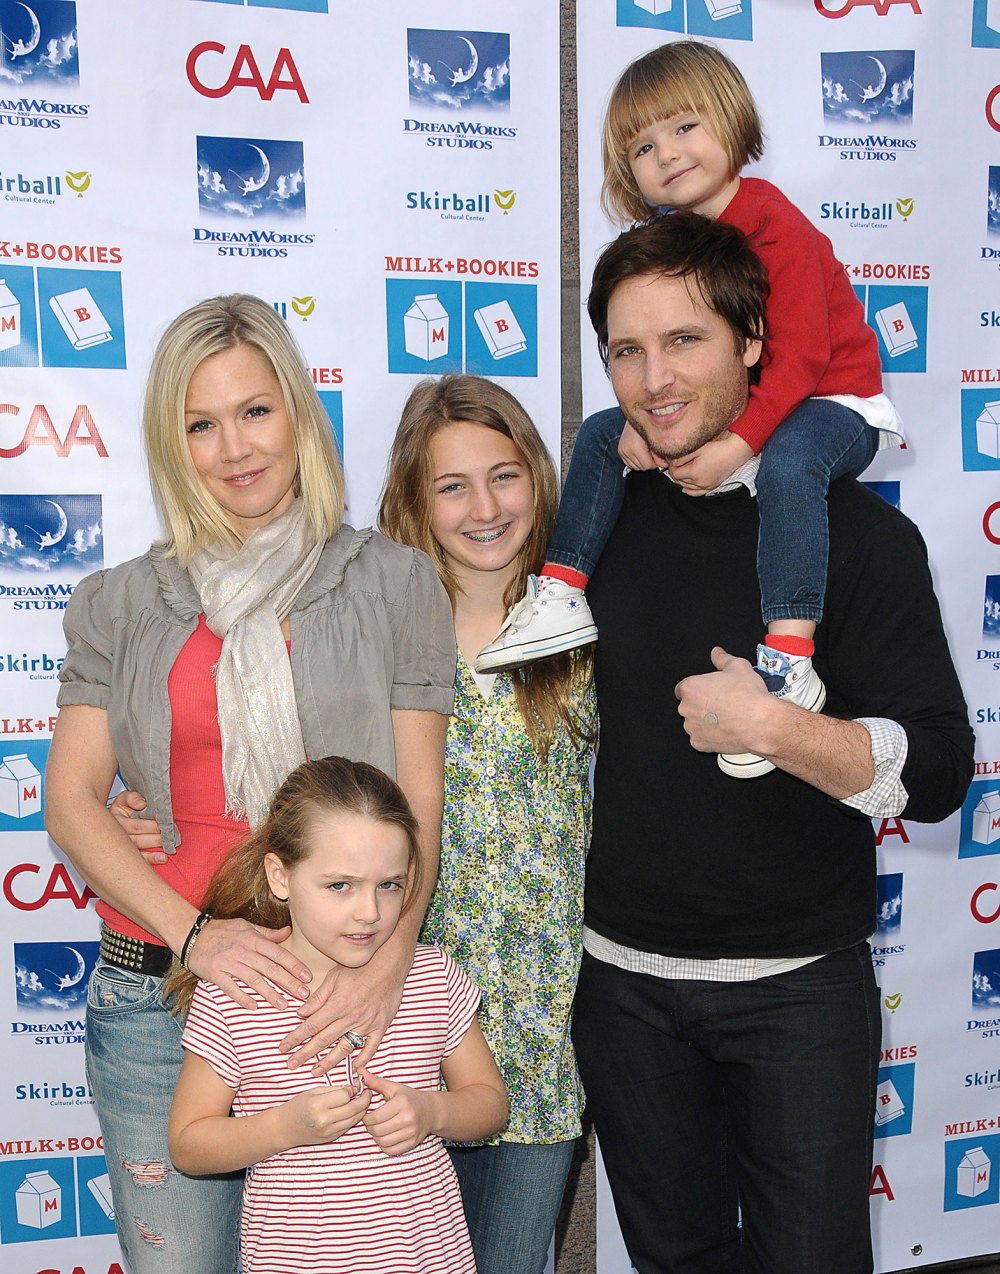 Peter Facinelli Compares Jennie Garth Relationship to an 'Arranged Marriage' as They Recall Divorce 